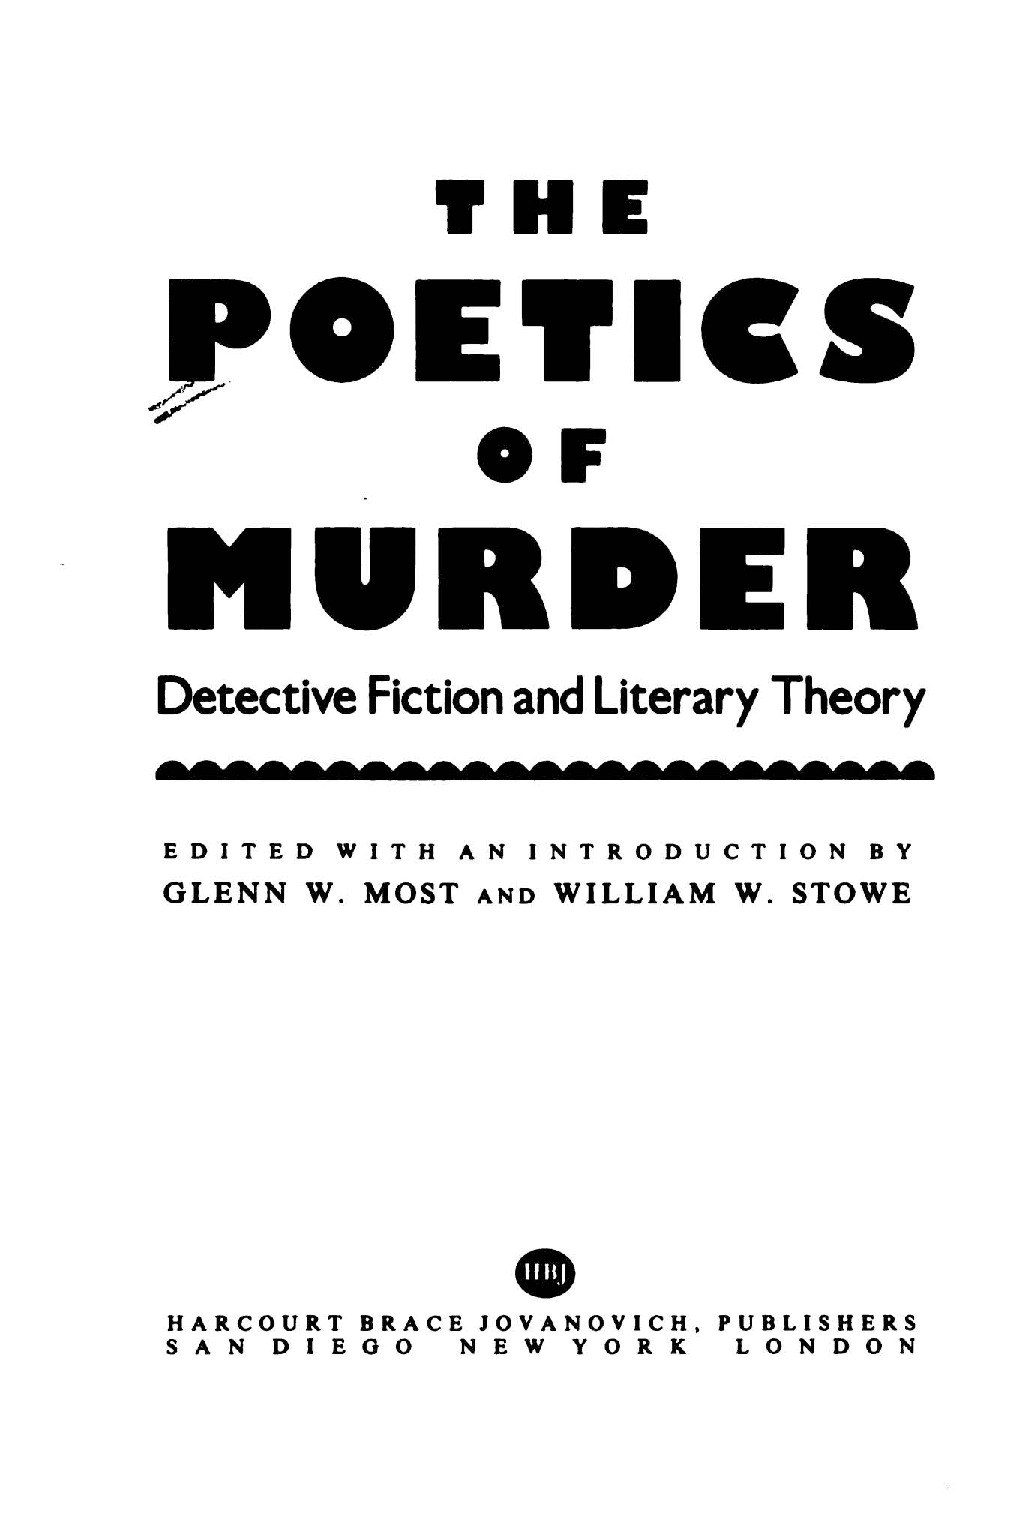 The Poetics of Murder Detective Fiction and Literary Theory 0151722803, 9780151722808